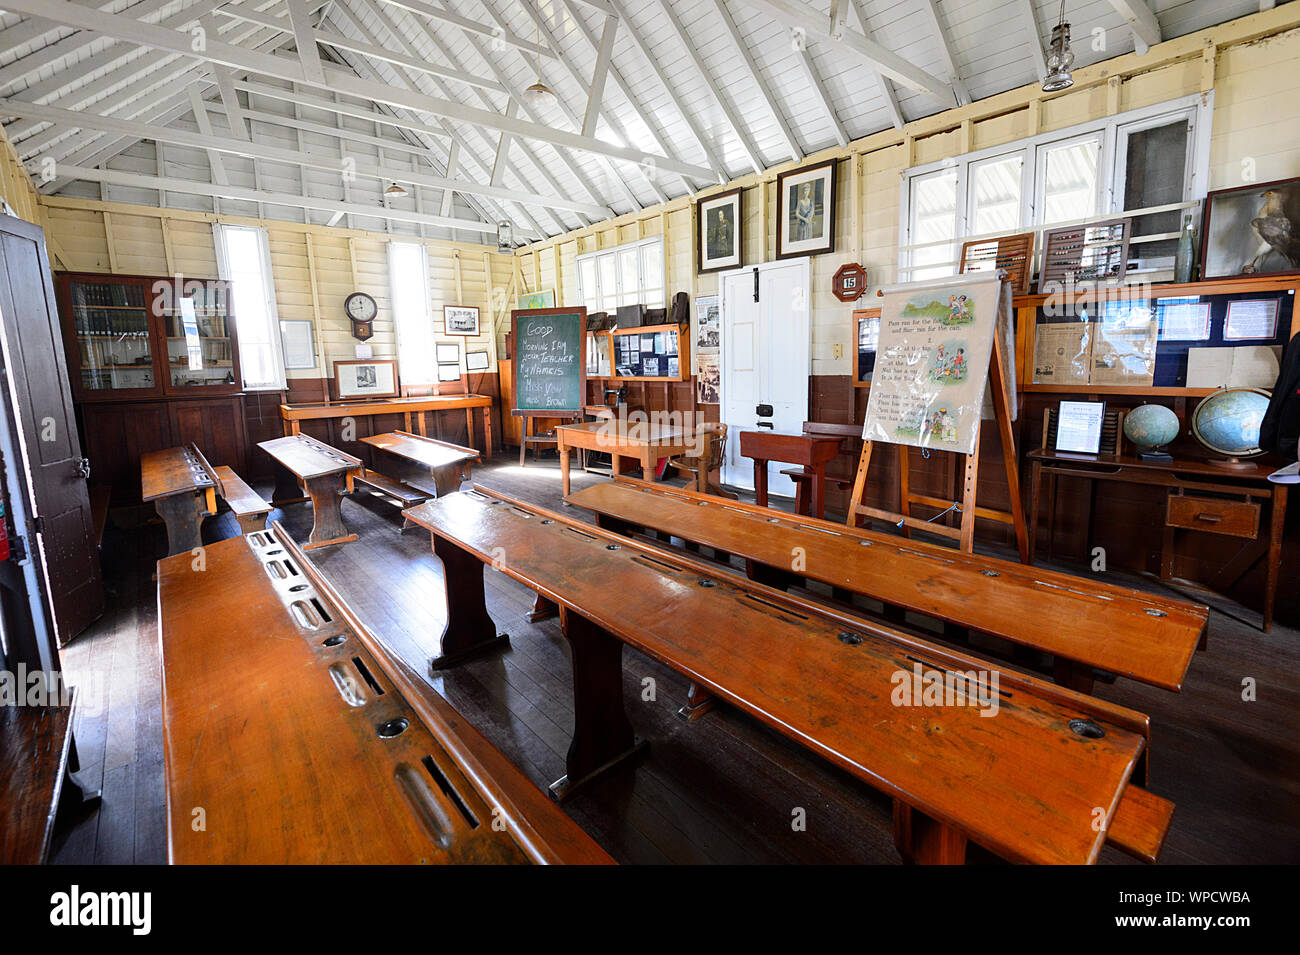 Rows of desks in an old classroom at Beenleigh Historical Village and Museum, Queensland, QLD, Australia Stock Photo